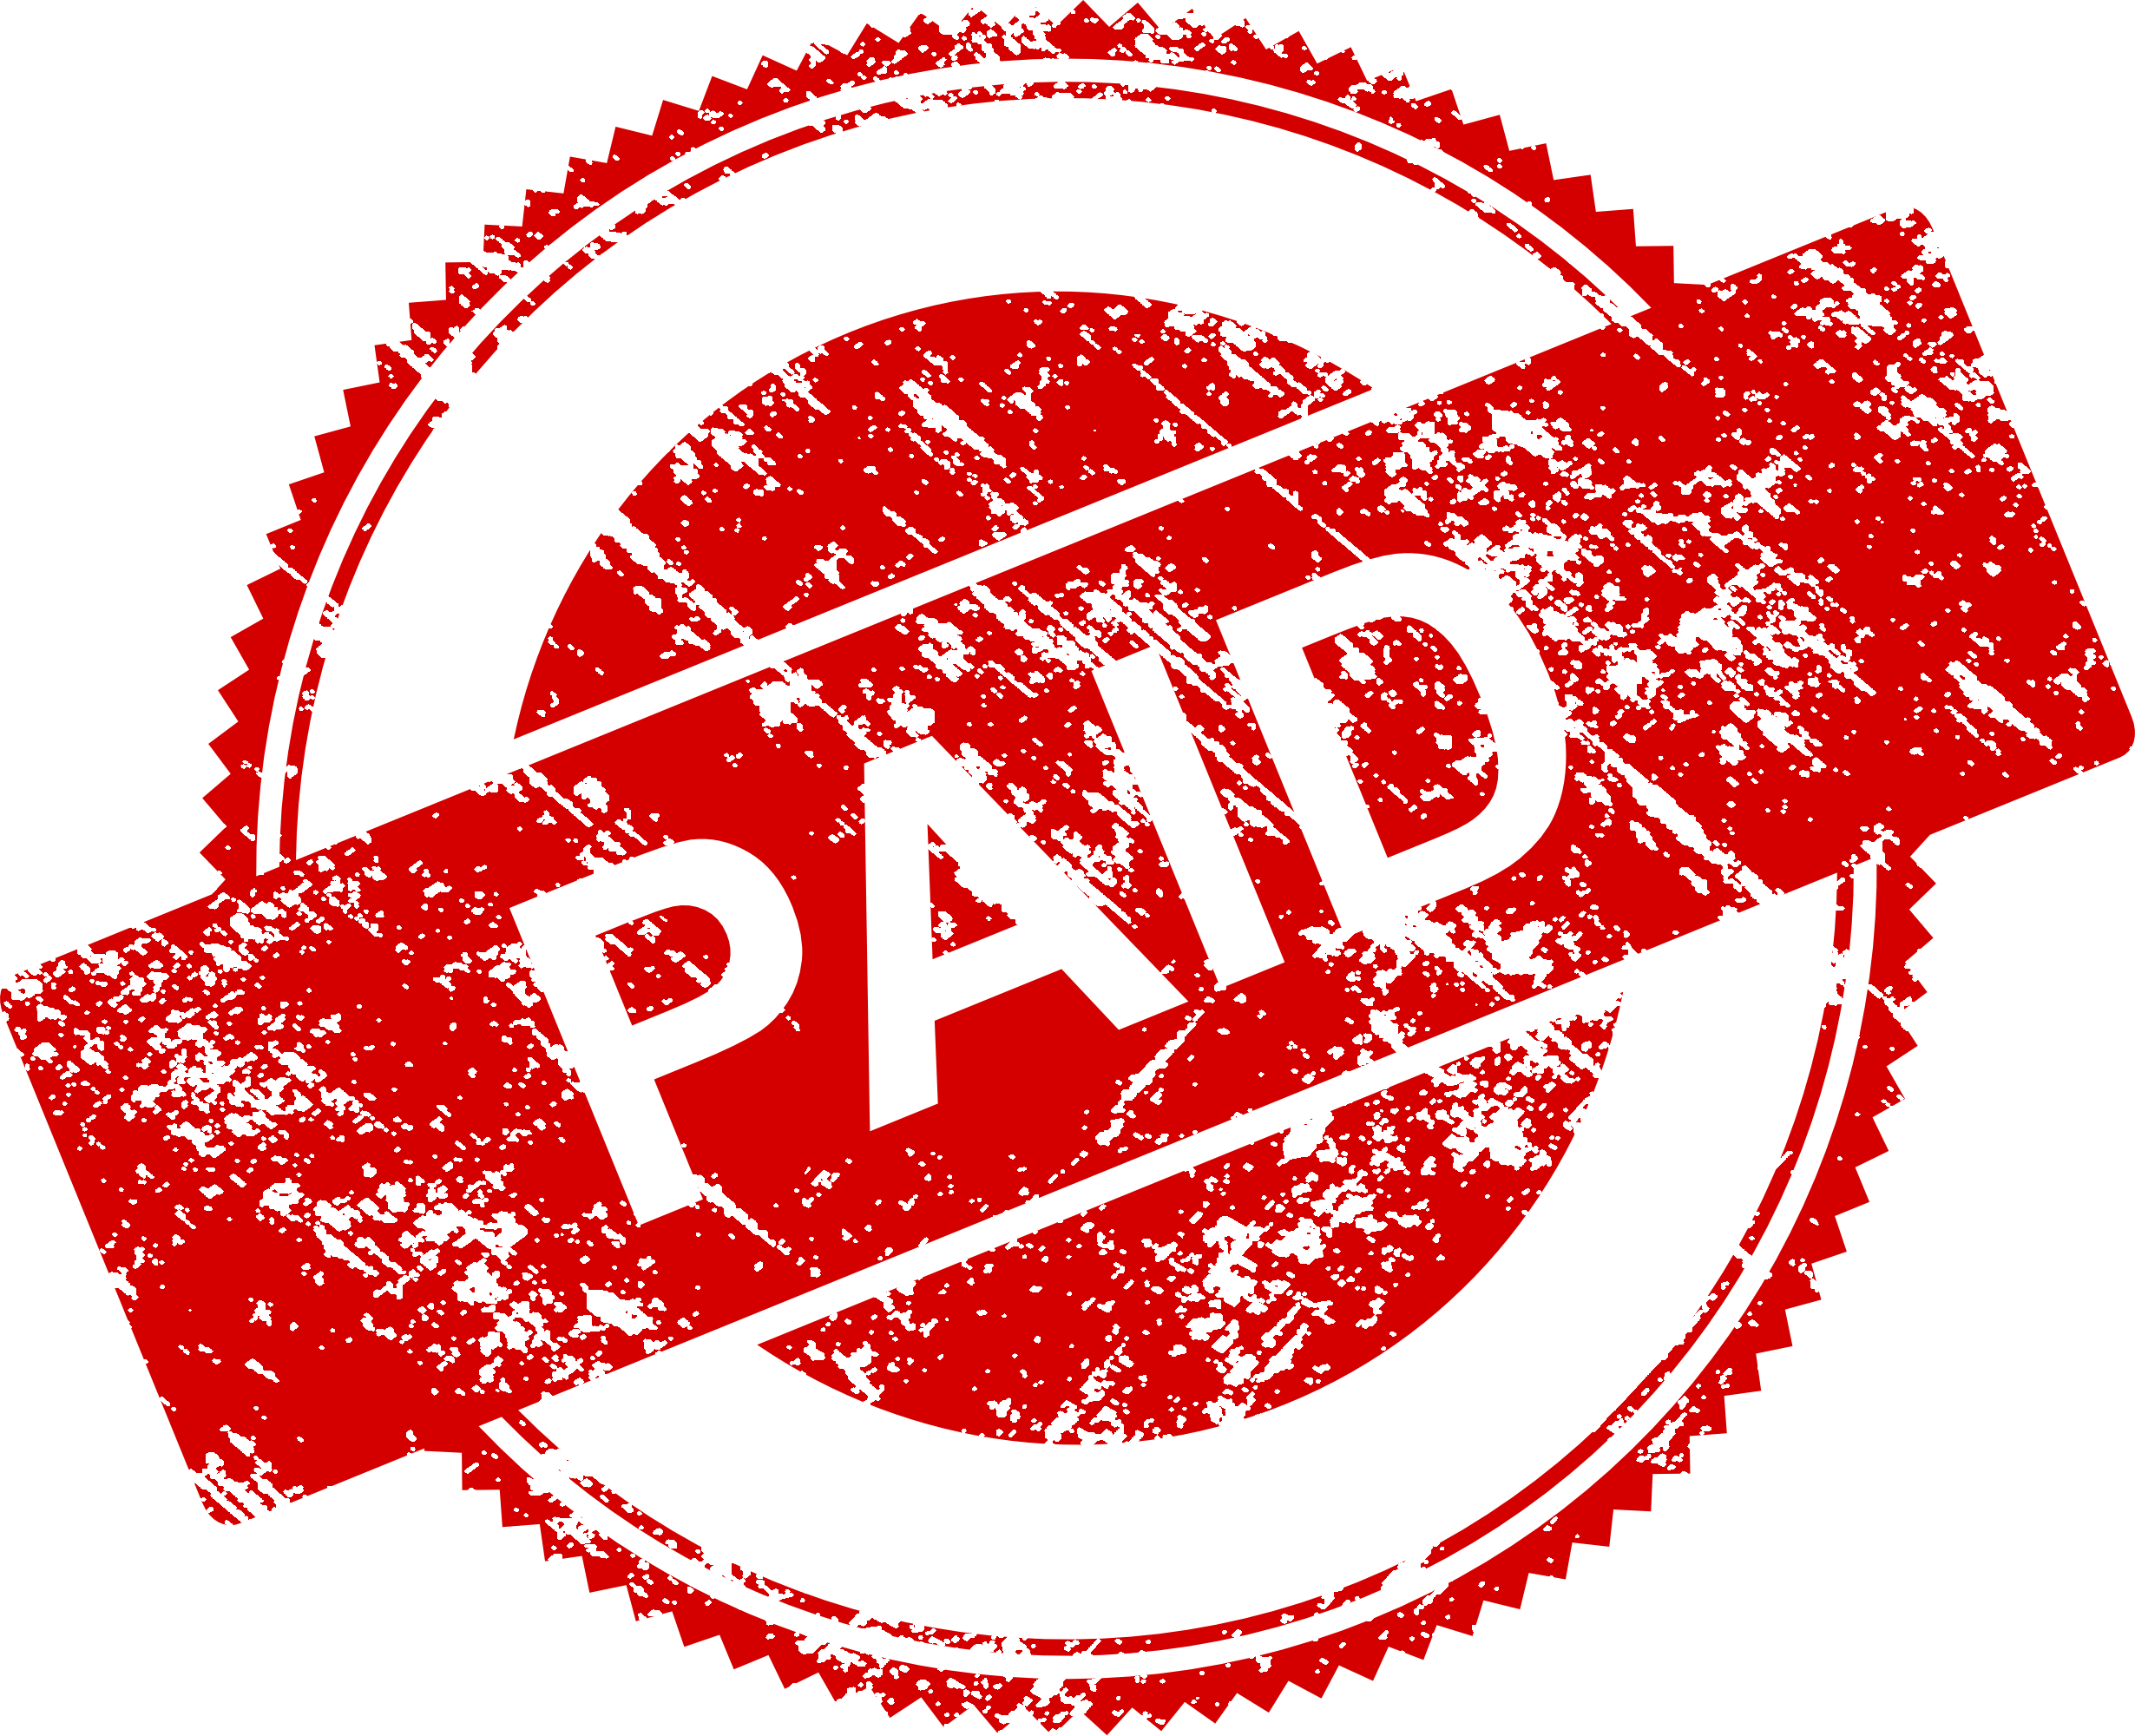 paid in full stamp clipart